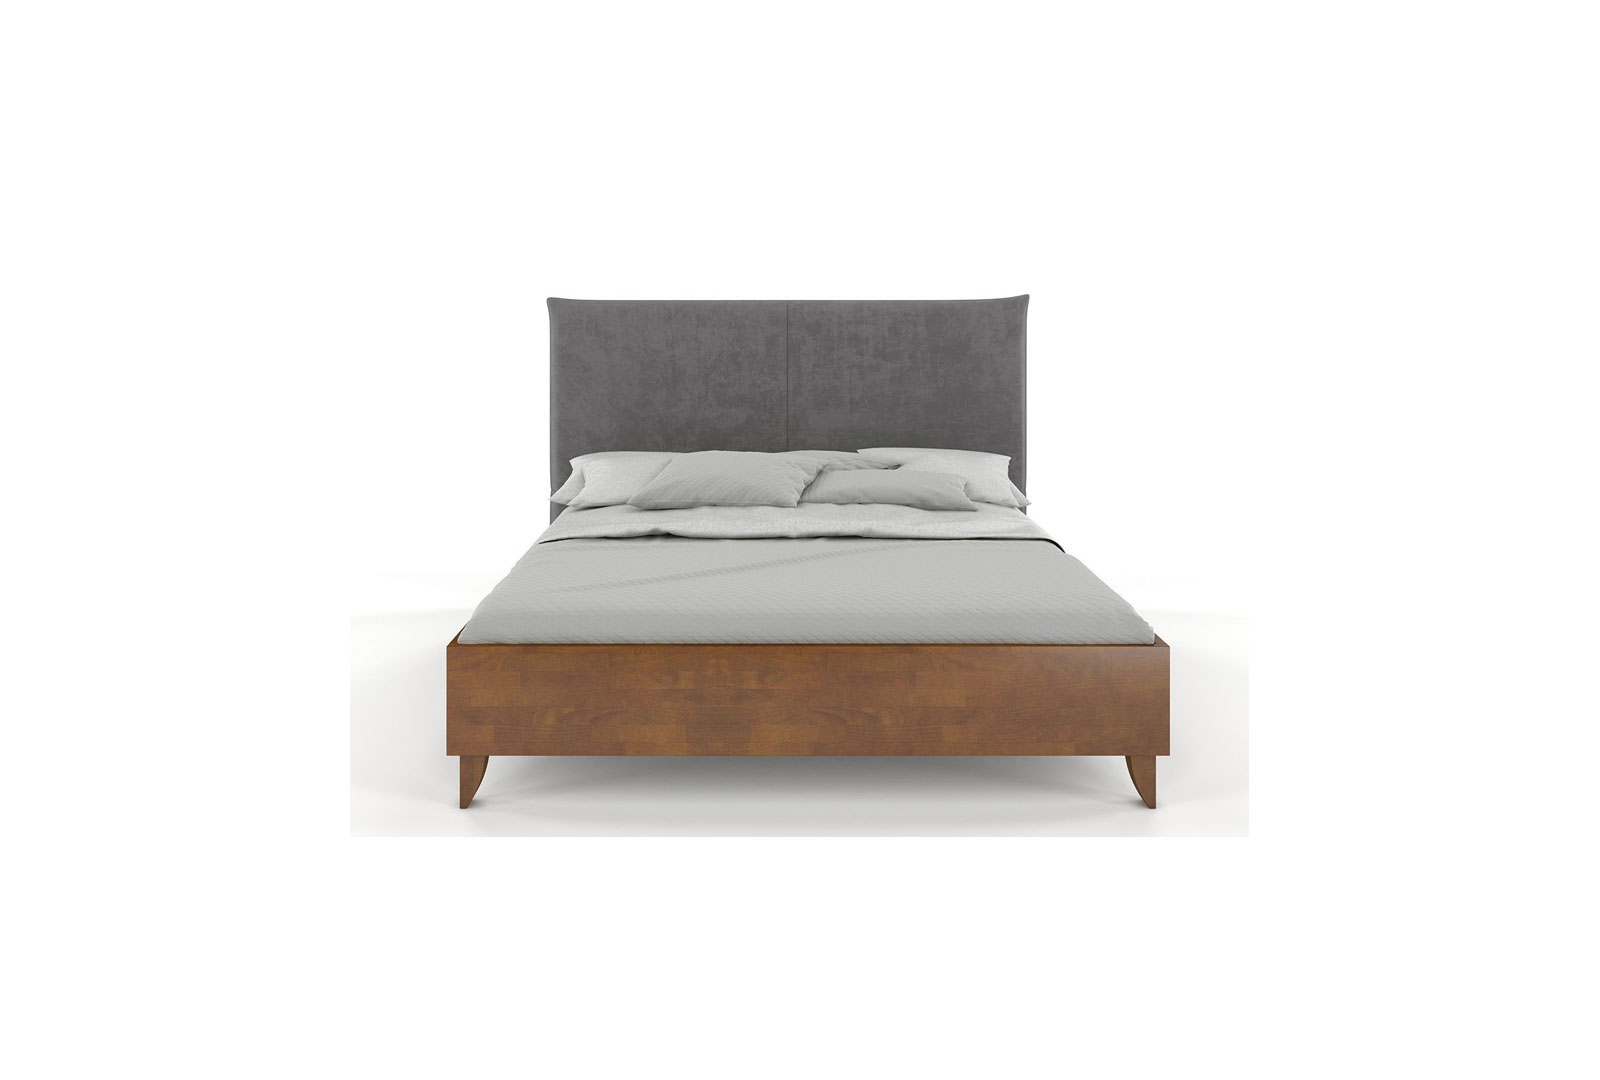 VISBY VIVIEN WOODEN BEECH BED WITH AN UPHOLSTERED HEADBOARD 3